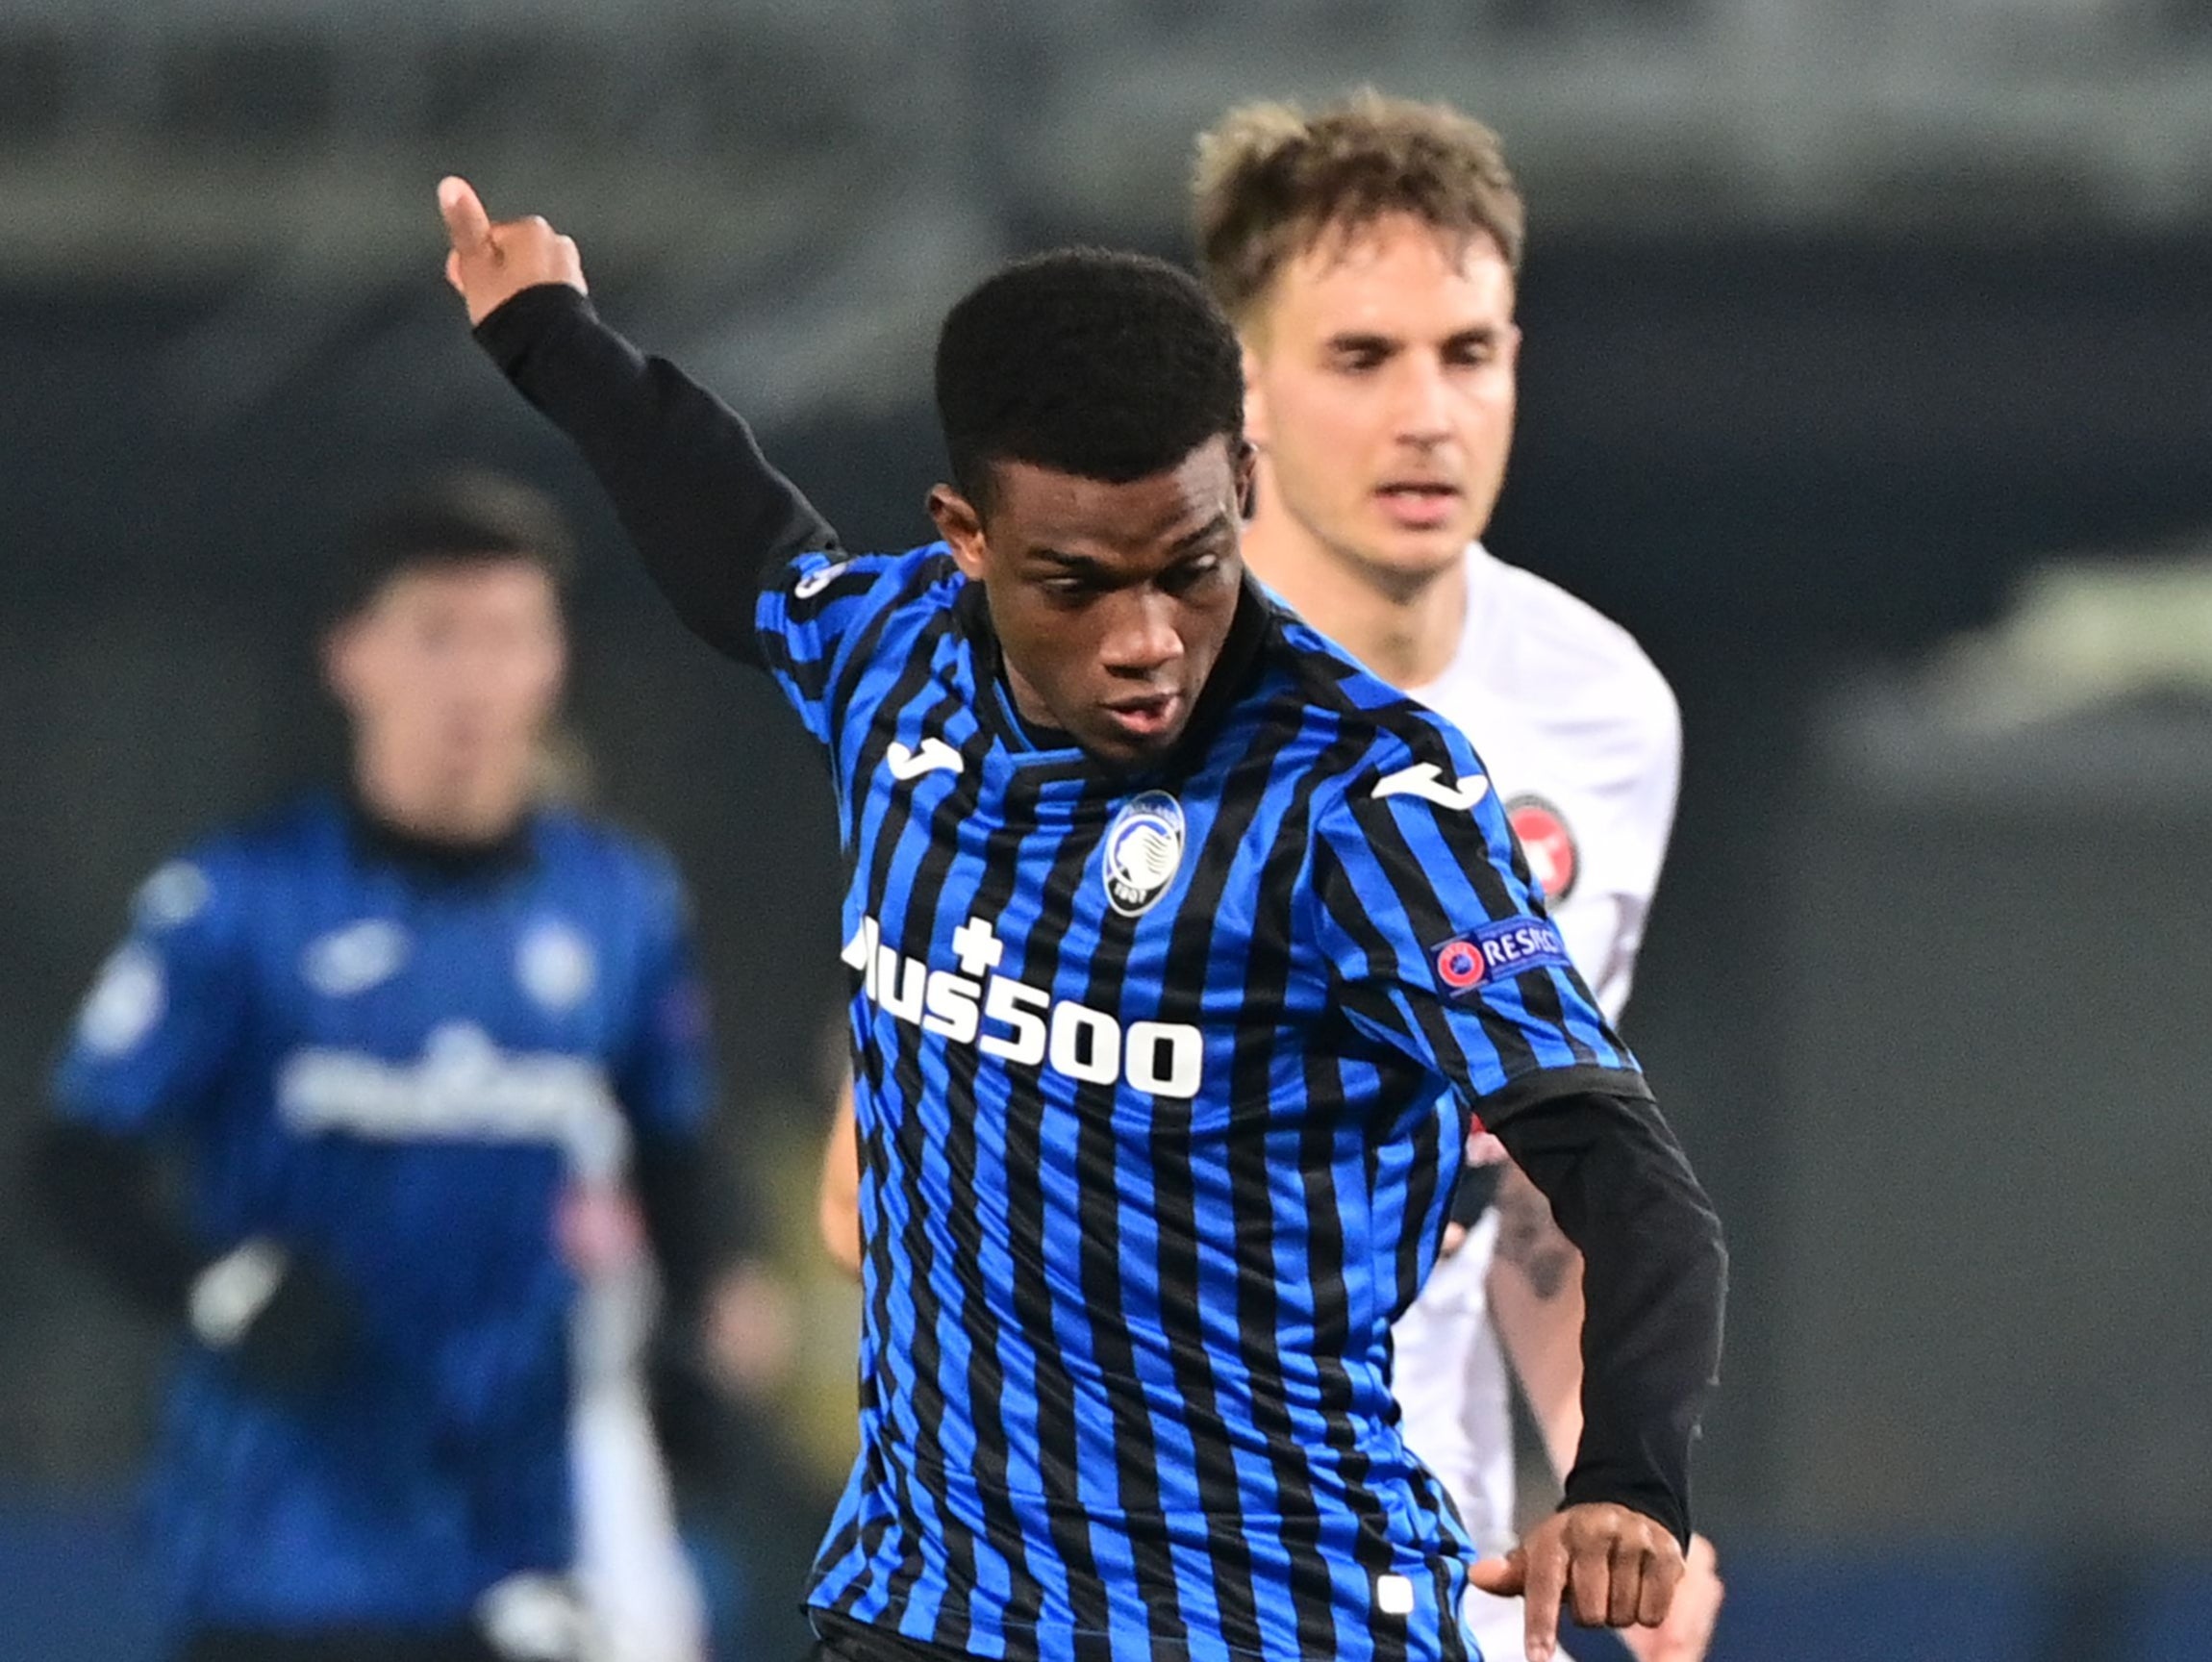 Atalanta winger Amad Diallo is set to join Manchester United